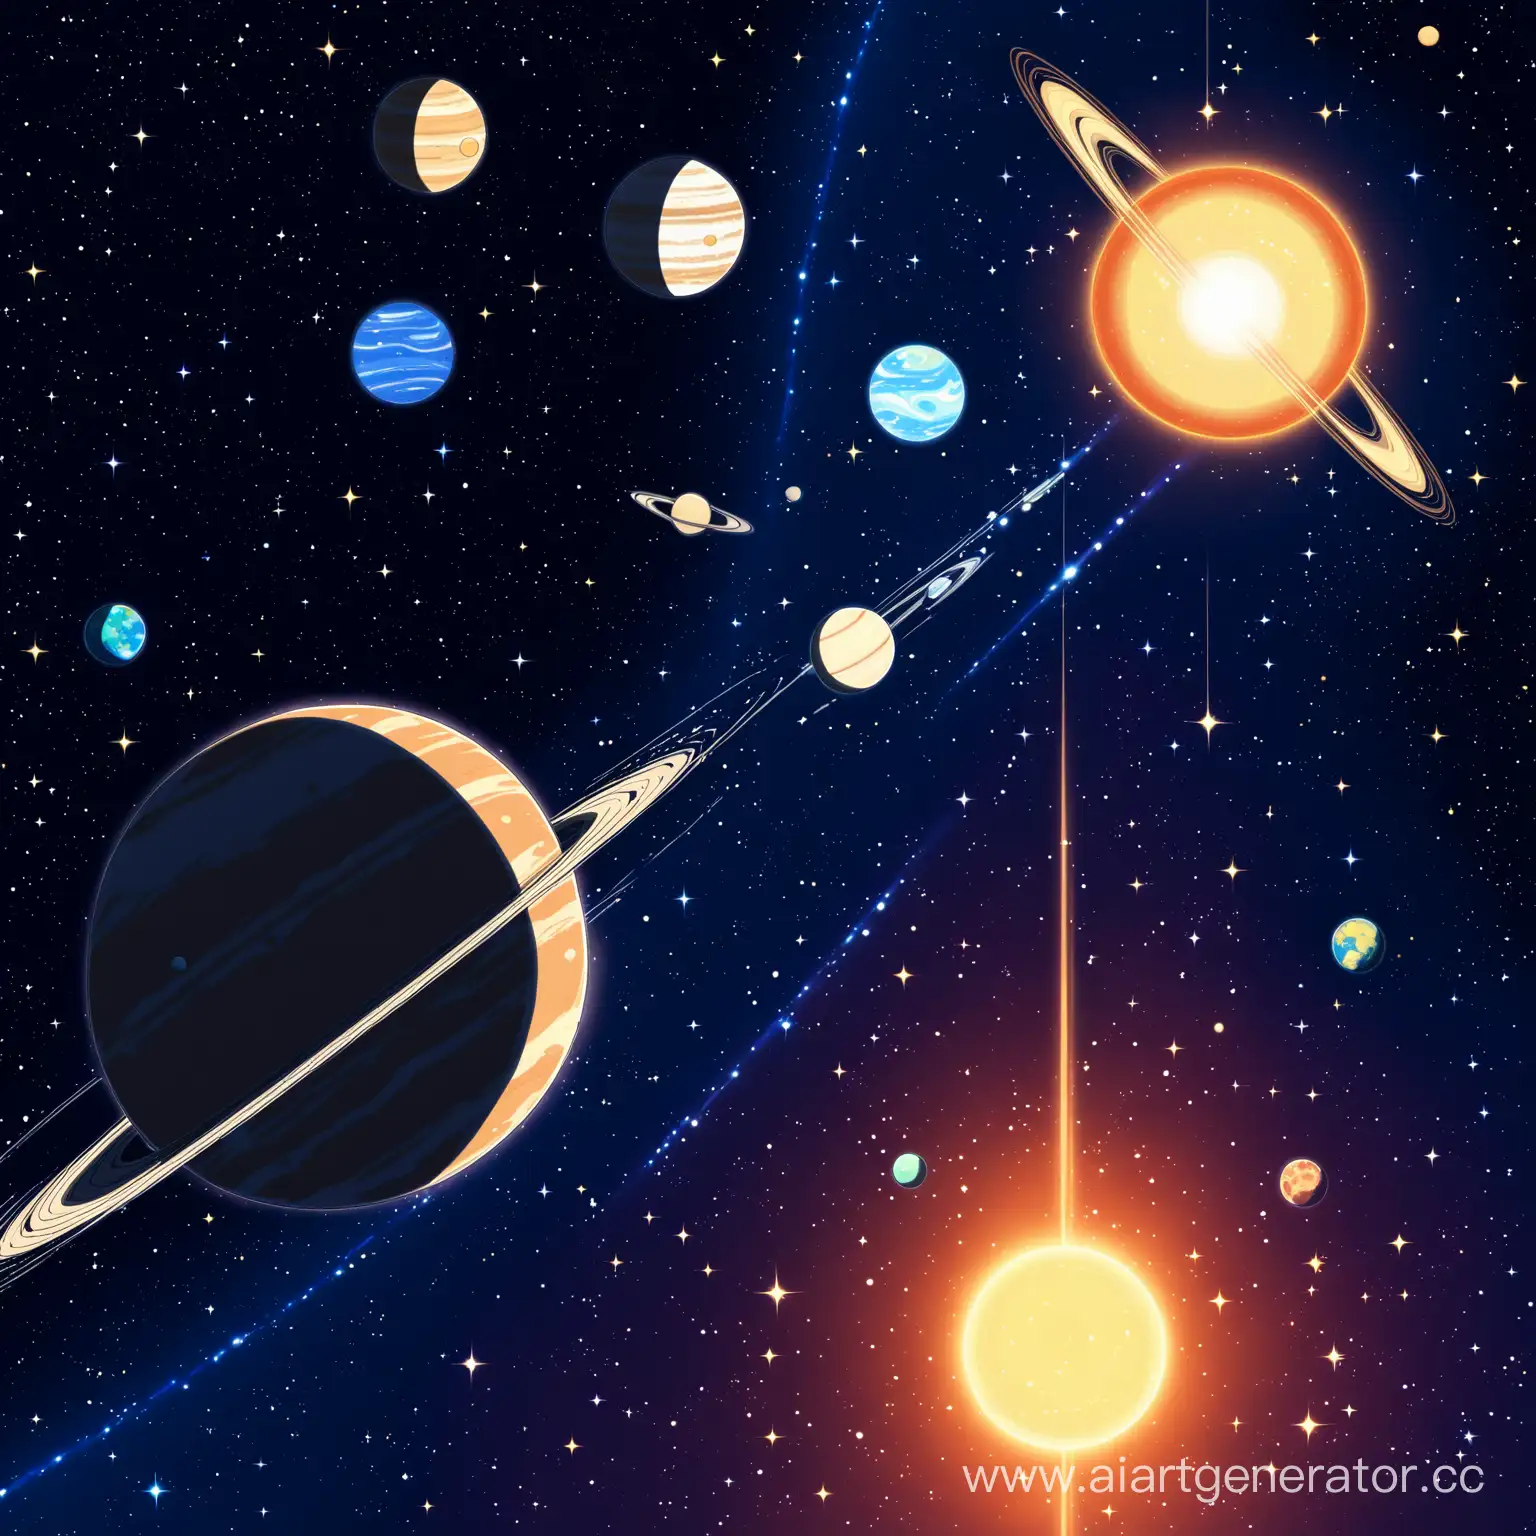 Anime-Style-Illustration-of-Stellar-Space-System-with-Sun-and-Three-Planets